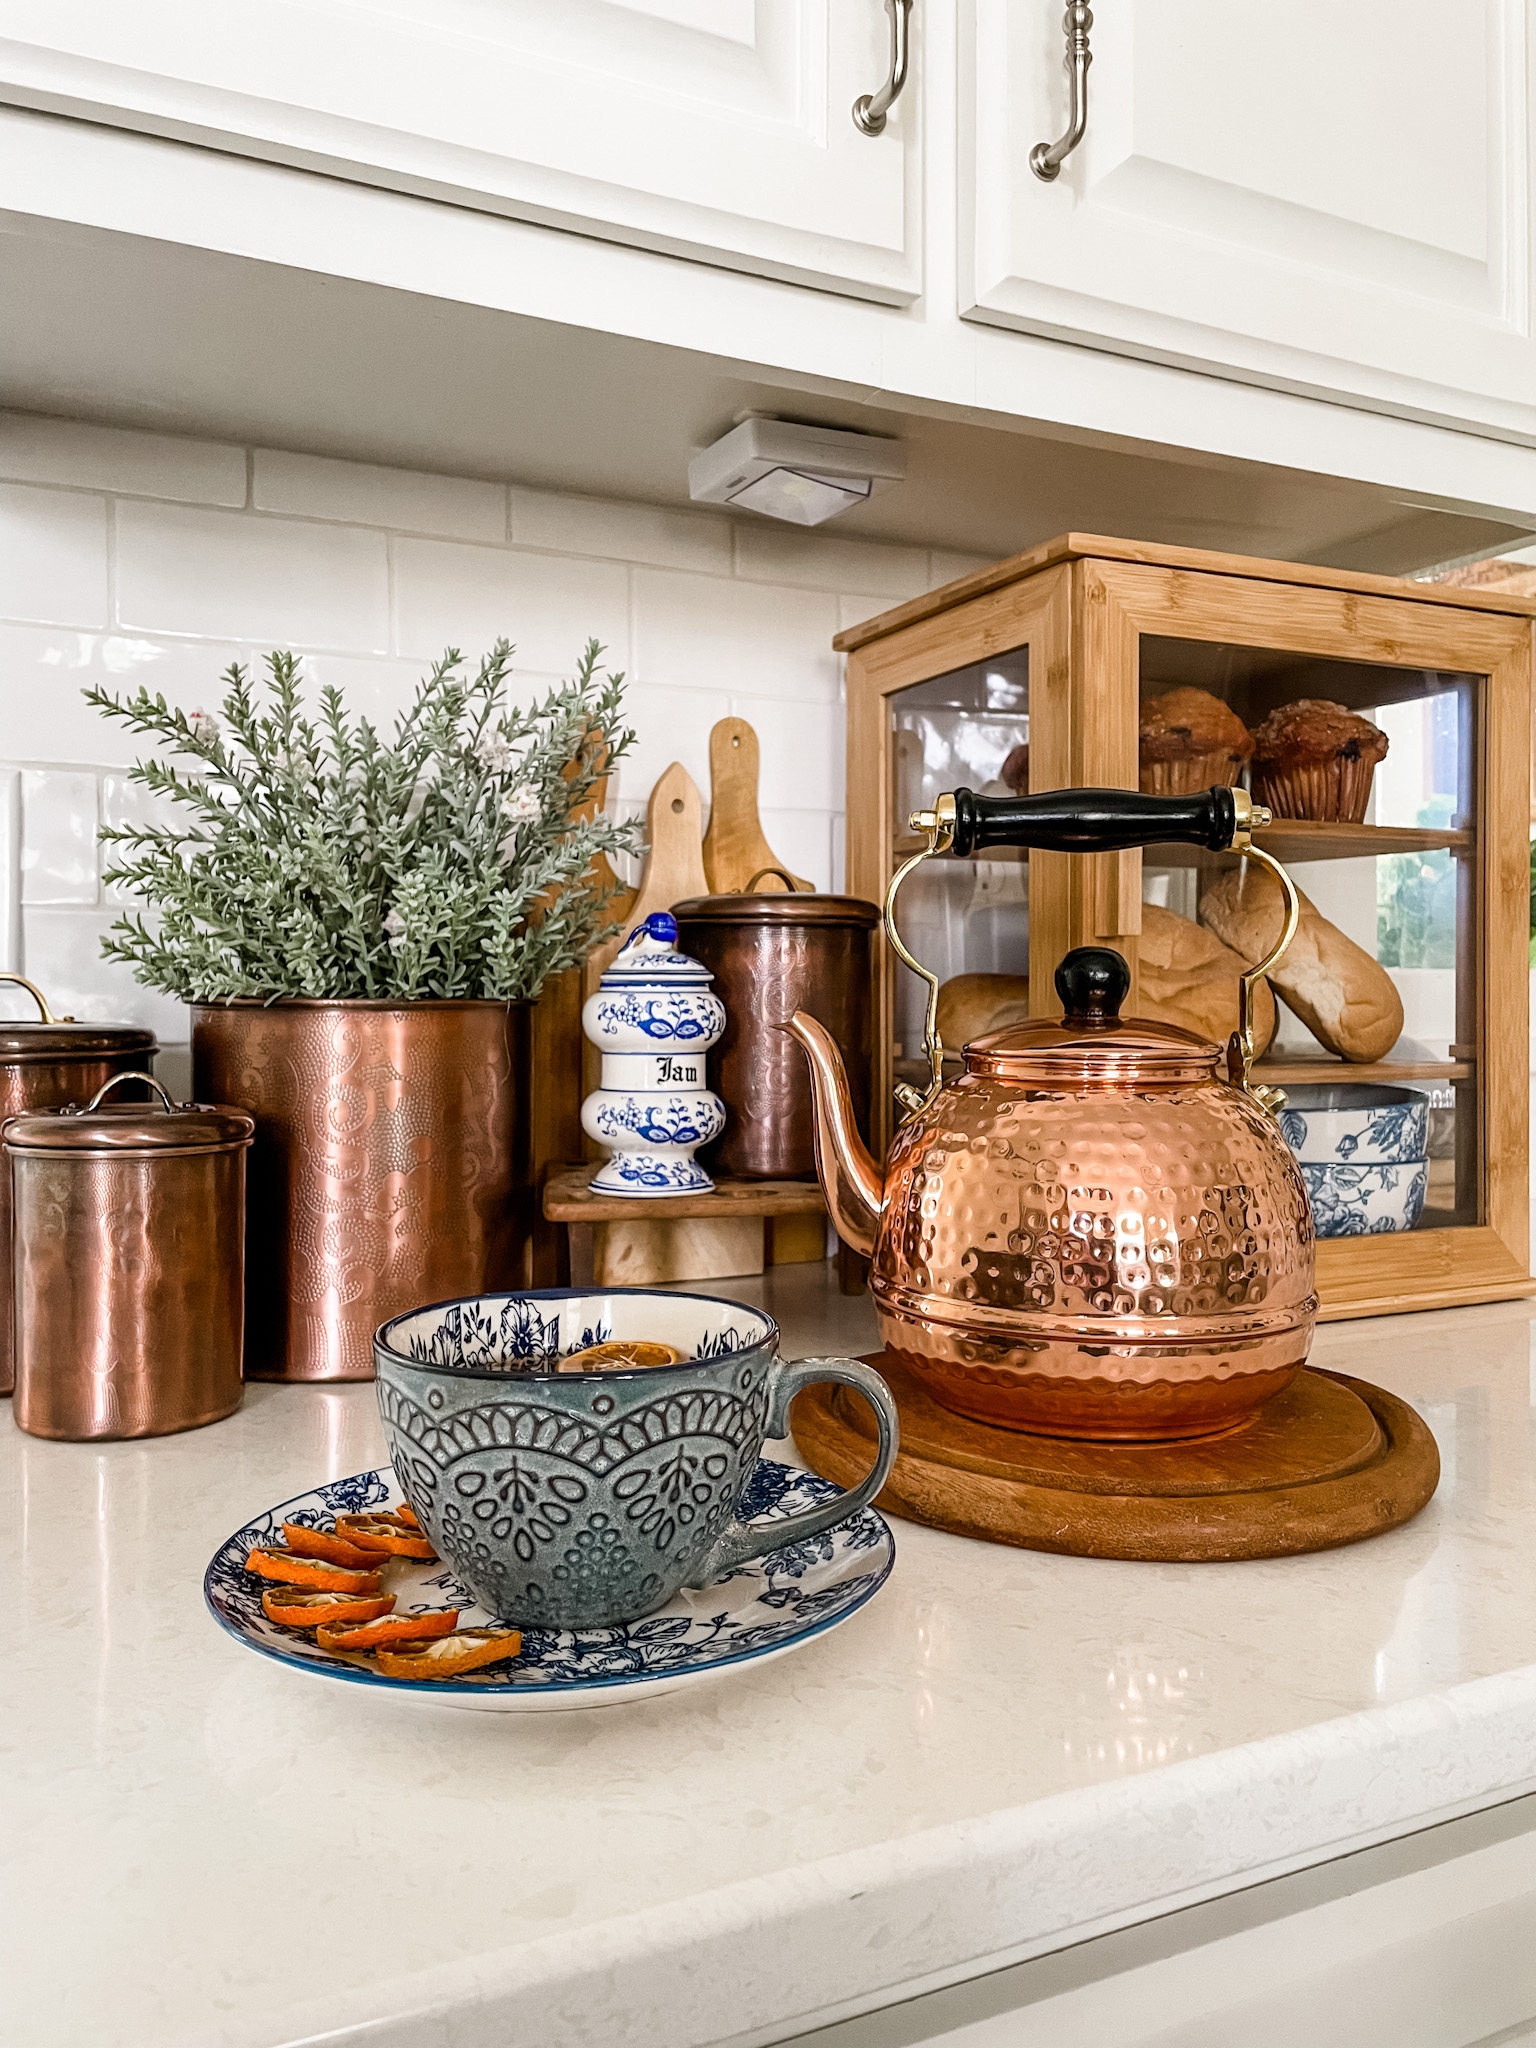 Classic copper tea kettle compliments vintage inspired blue and white dishes.